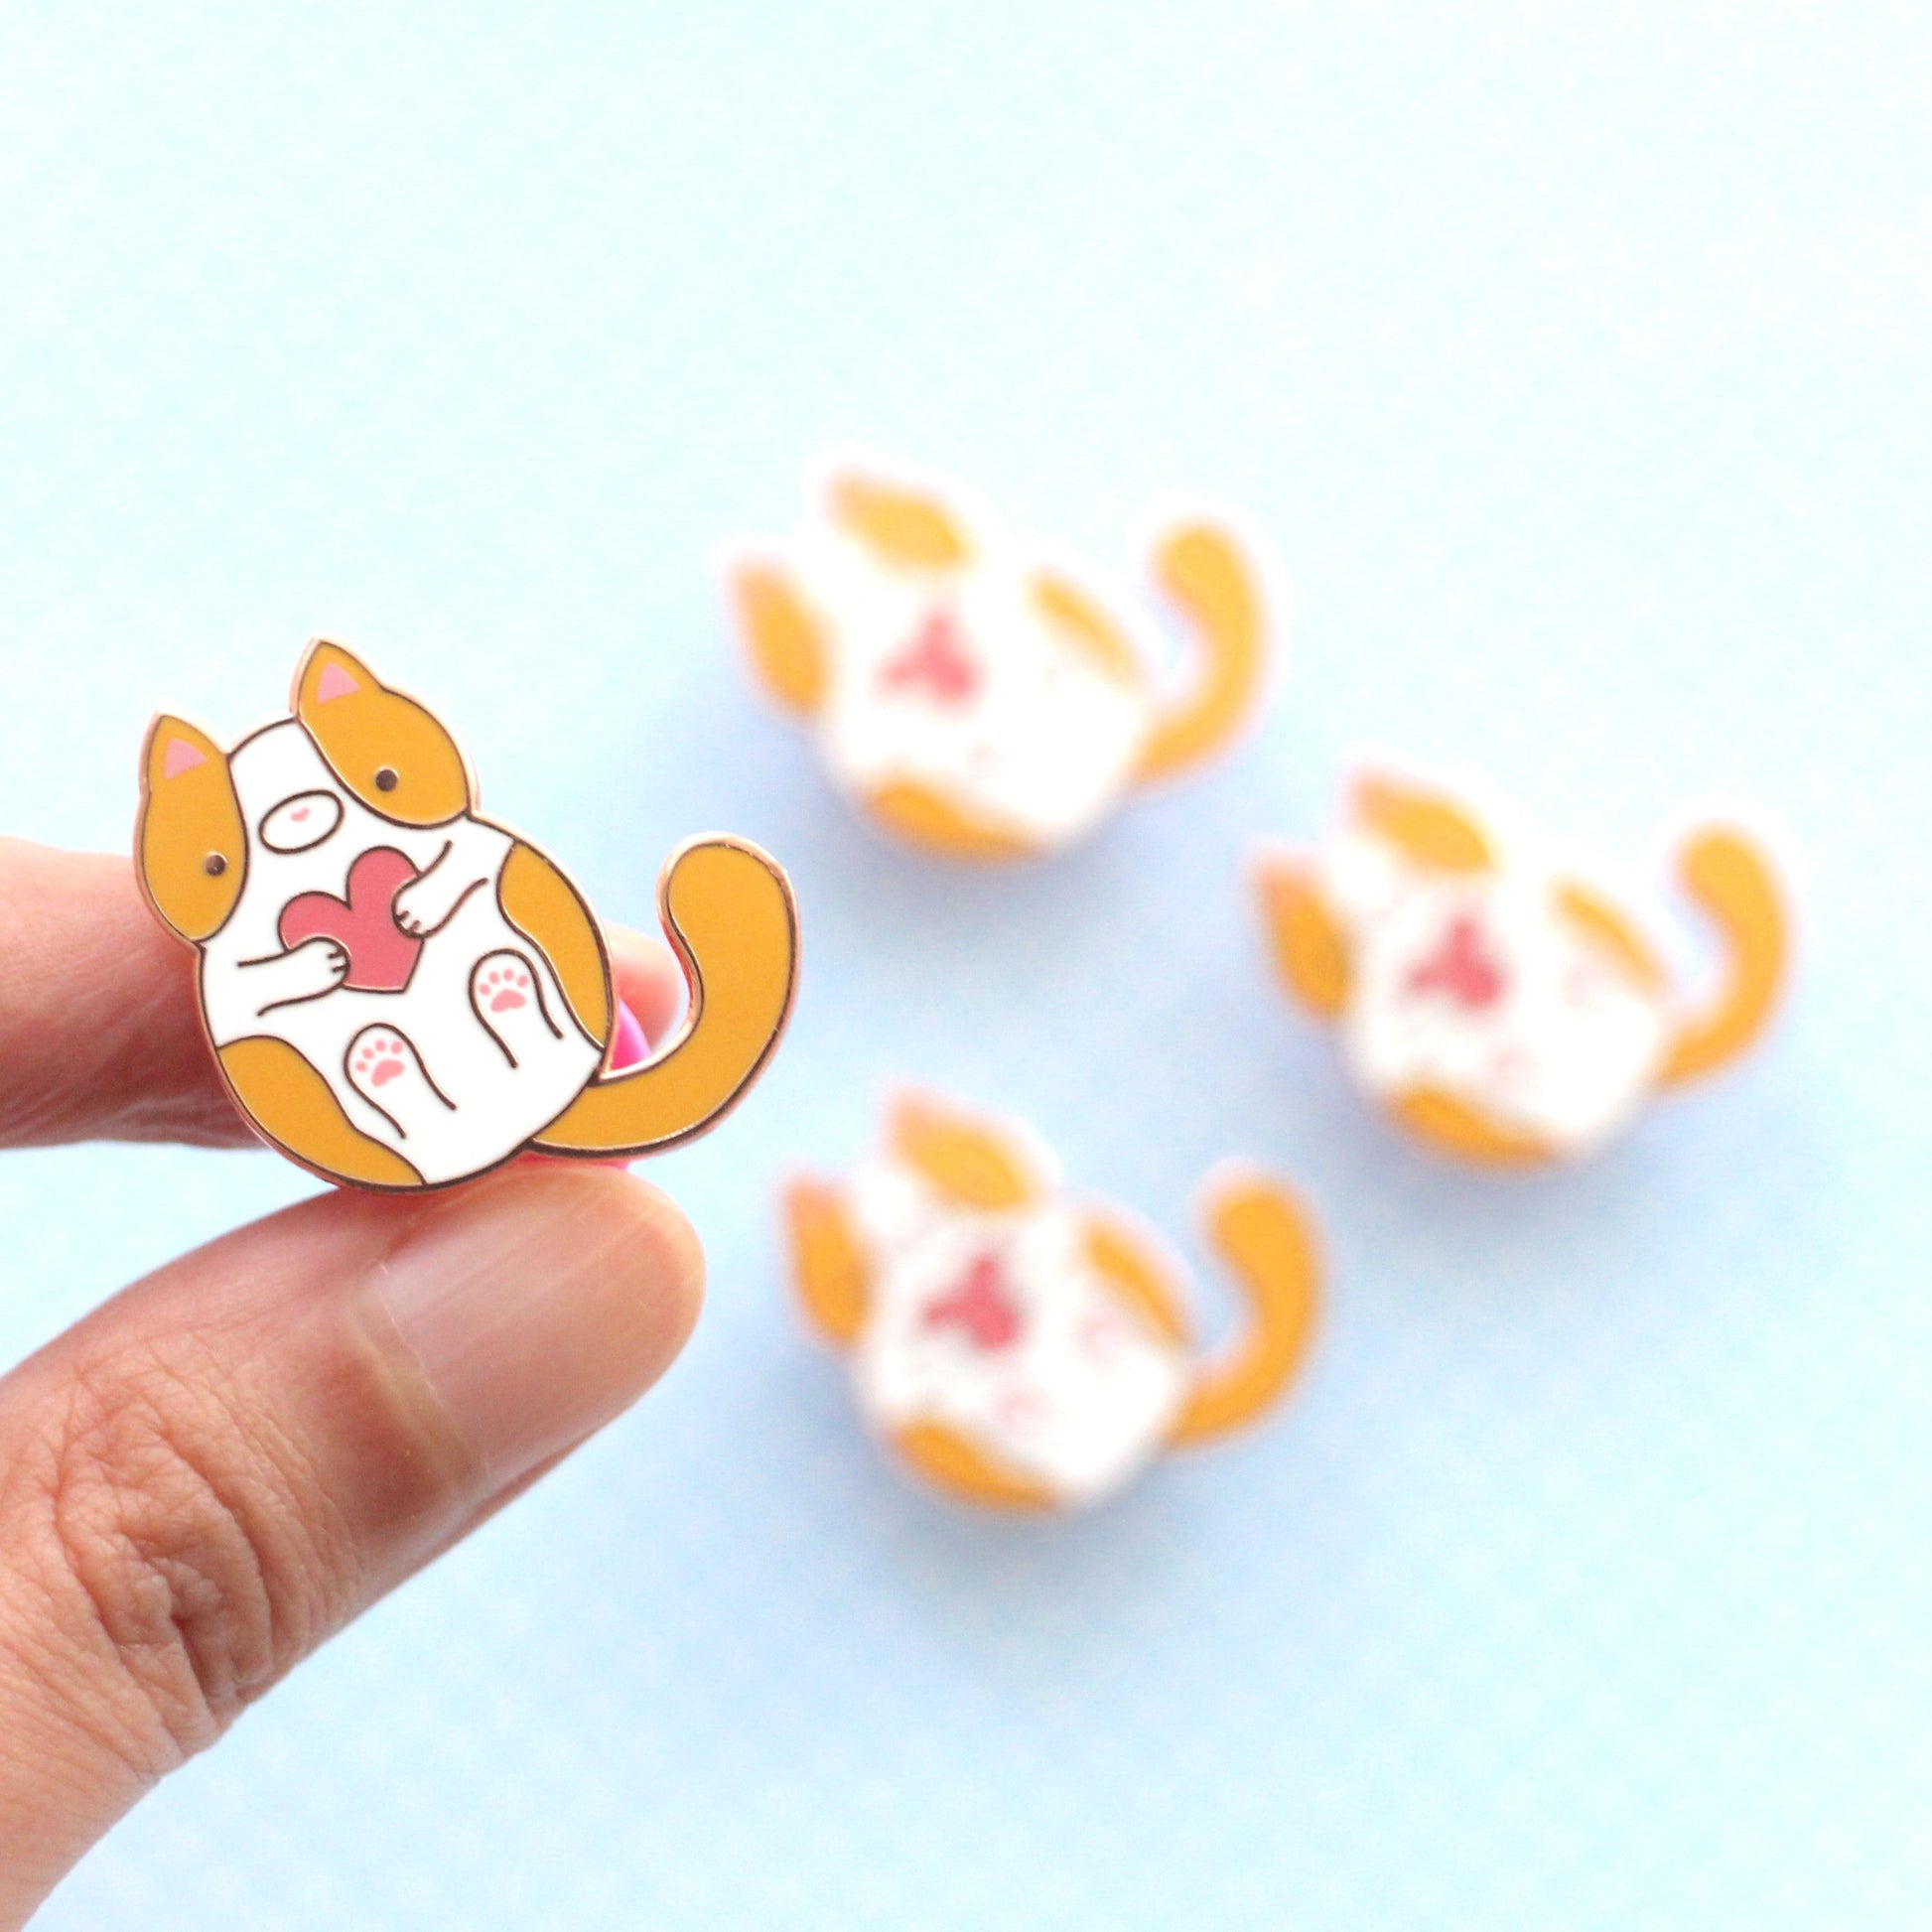 Bicolor Cat Pin Set. Cute Cat Gift. Enamel Pin Set by Wild Whimsy Woolies